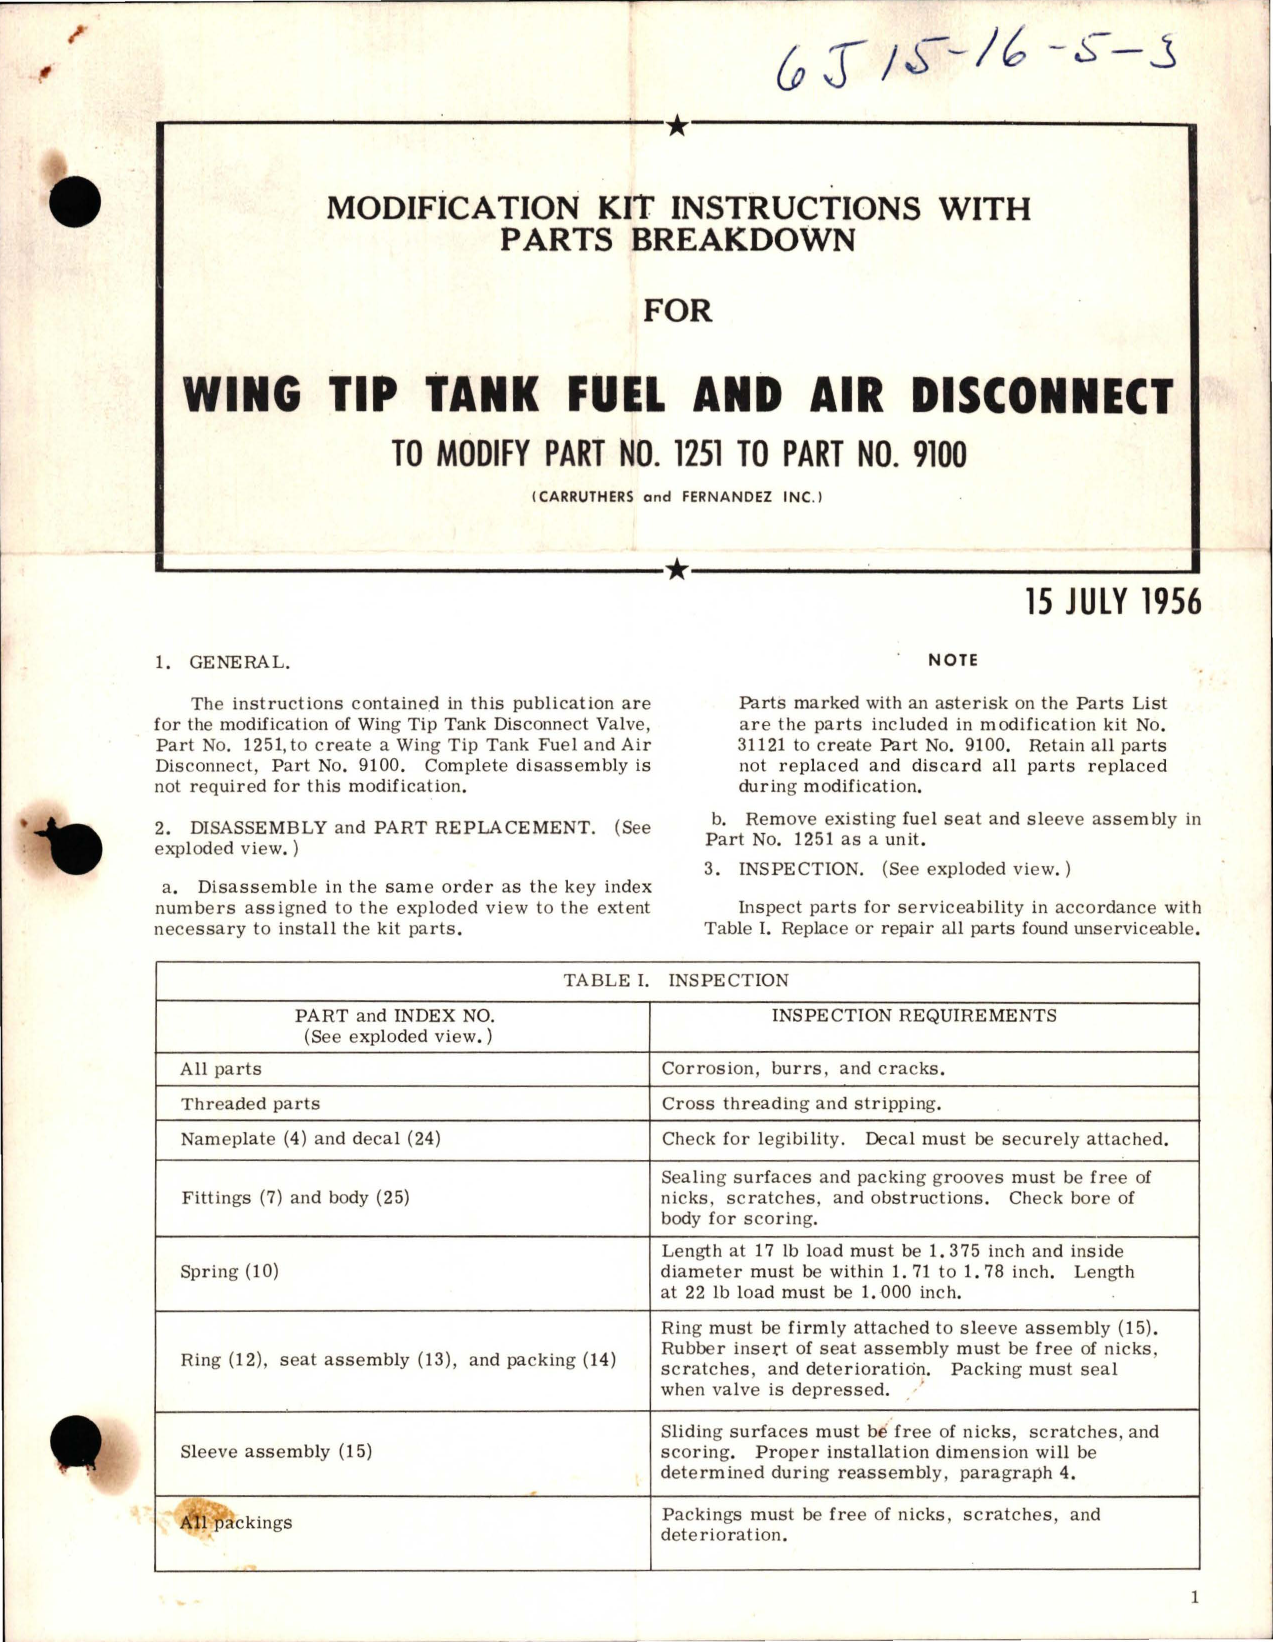 Sample page 1 from AirCorps Library document: Modification Kit Instructions with Parts Breakdown for Wing Tip Tank Disconnect Valve - Parts 1251 to 9100